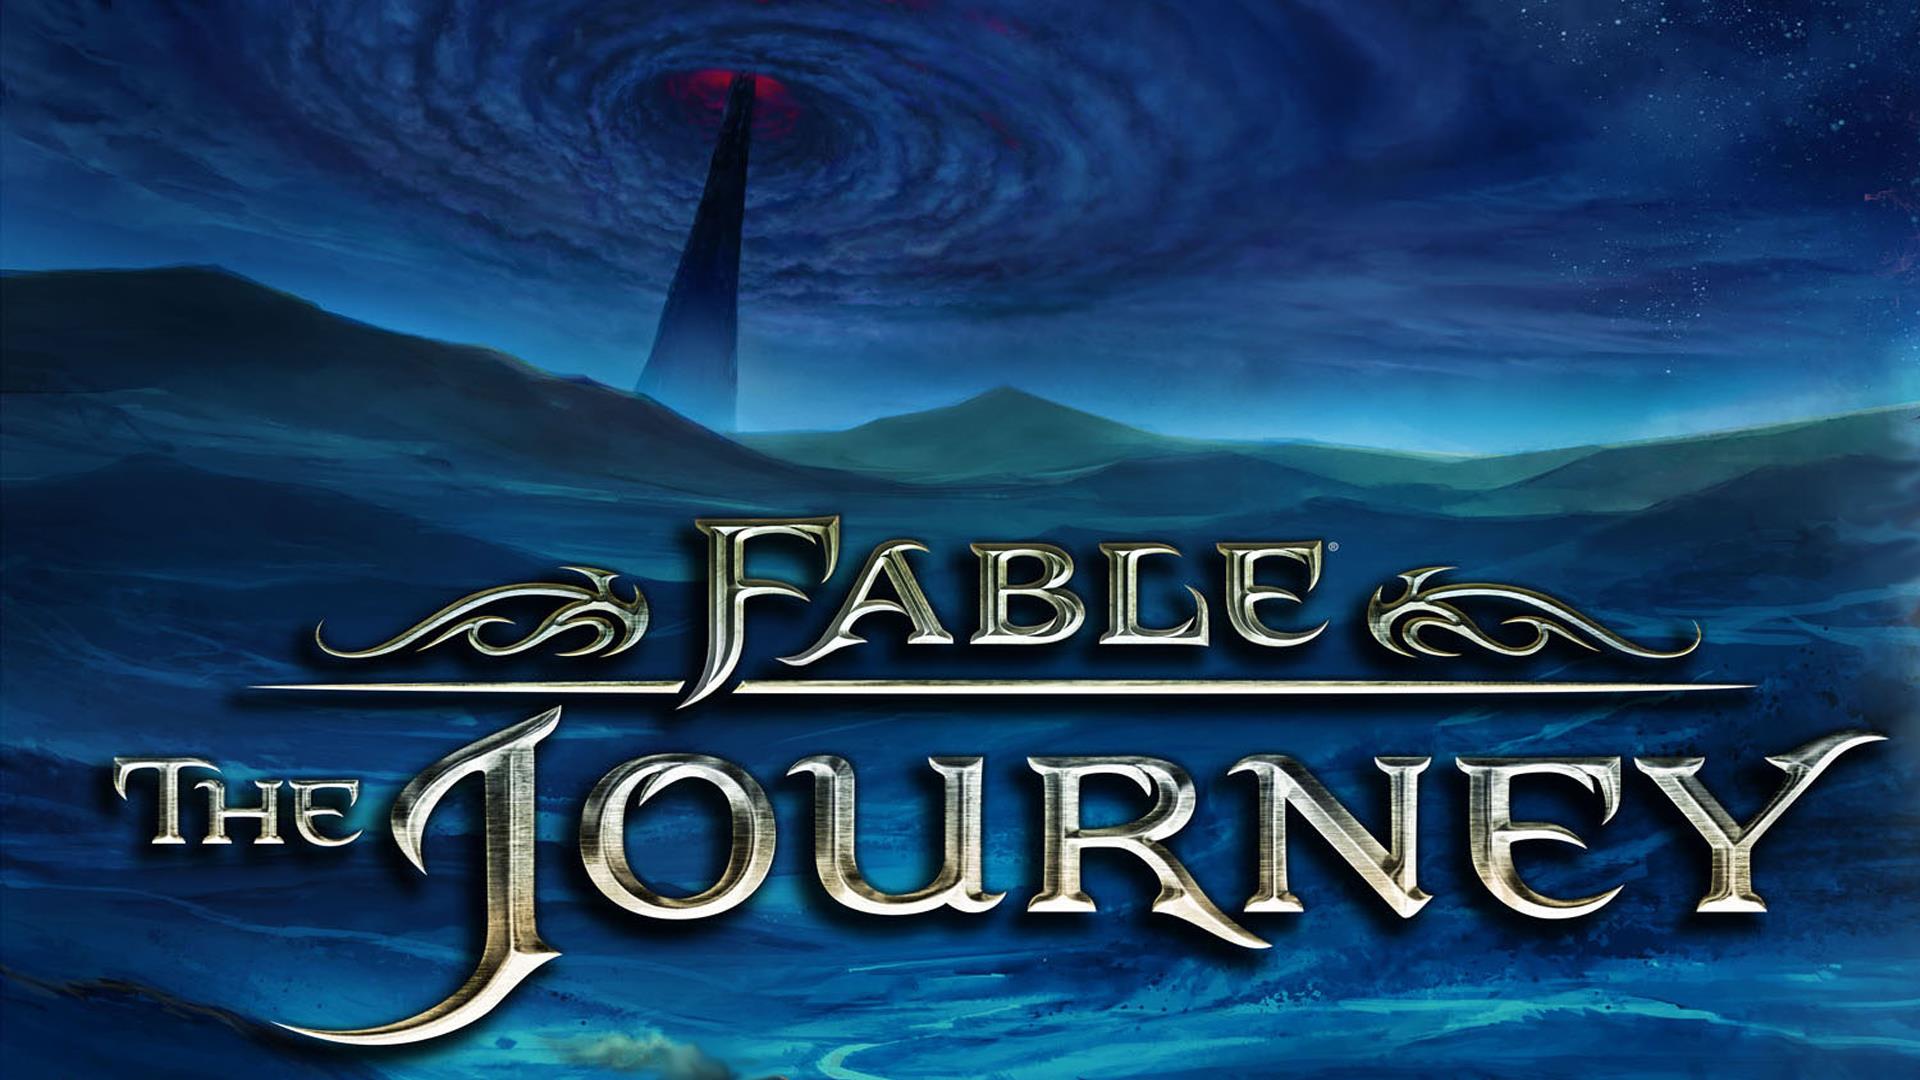 Video Game Fable HD Wallpaper | Background Image